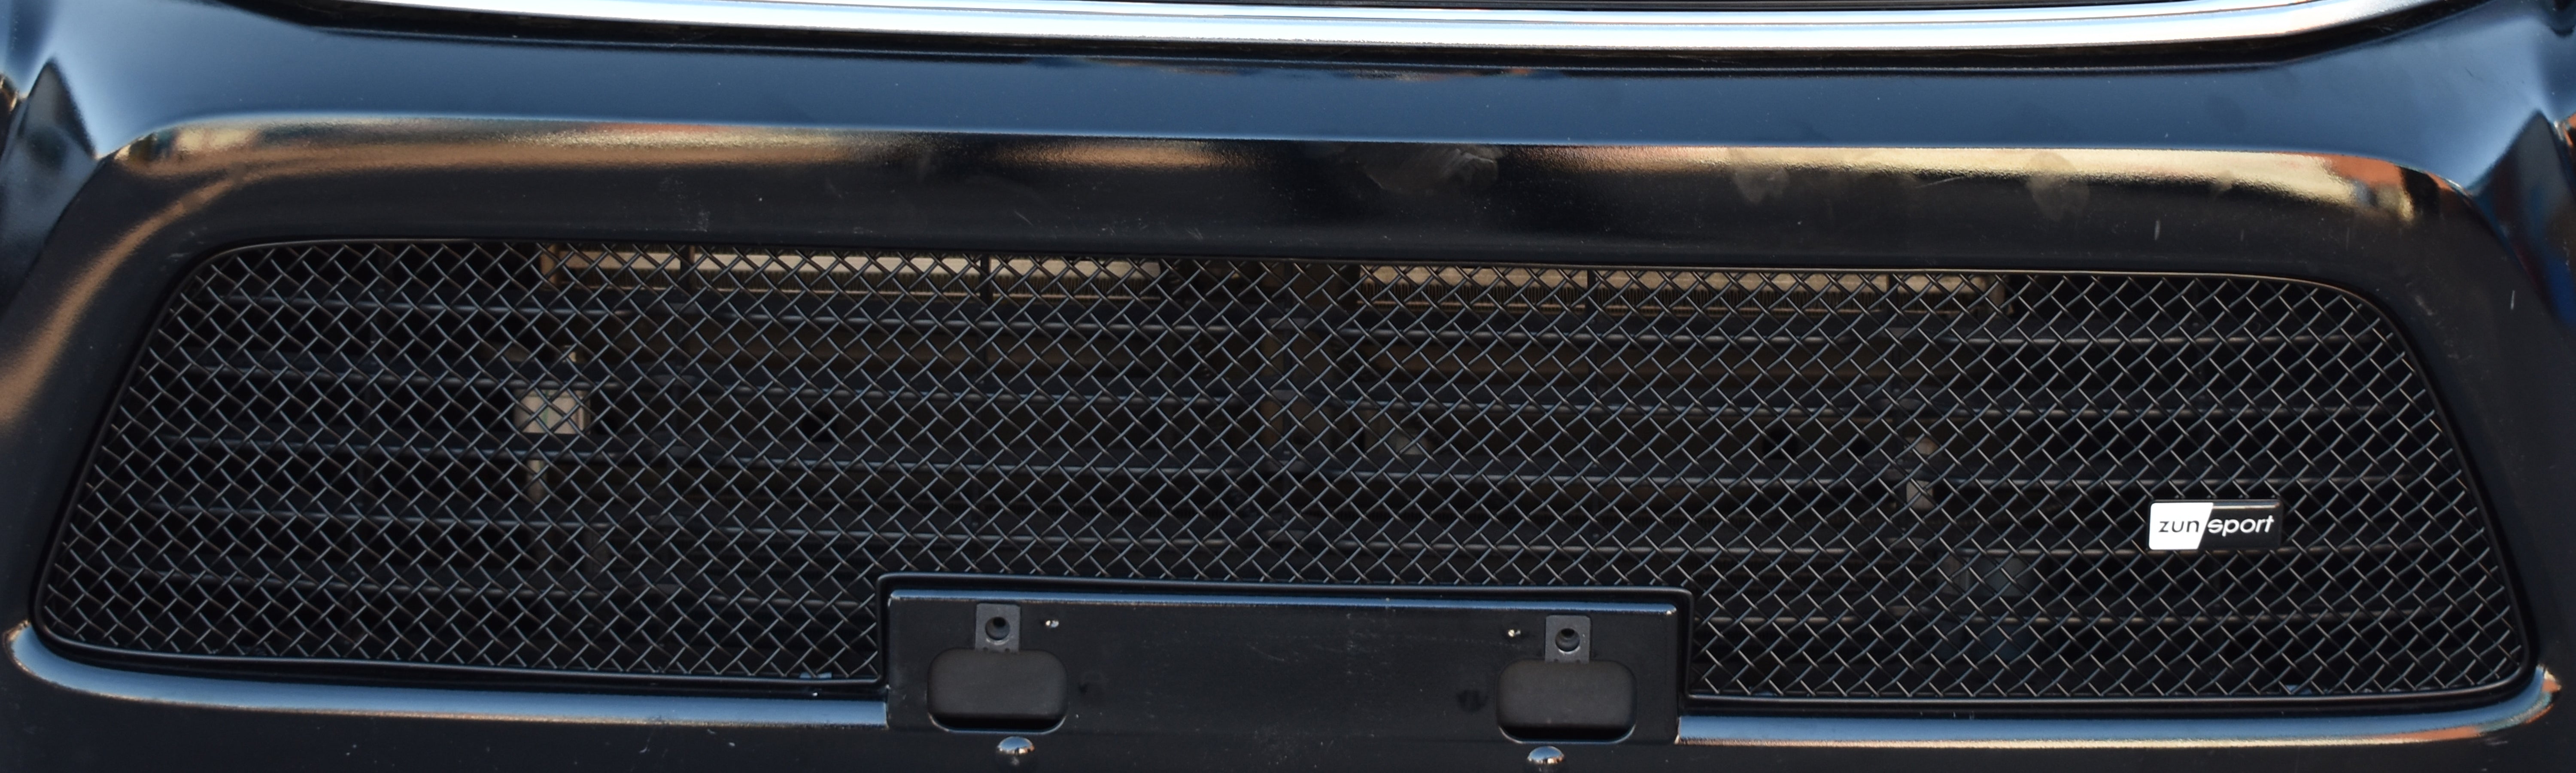 Zunsport Toyota Hilux AN120 / AN130 2015 - Lower Grille